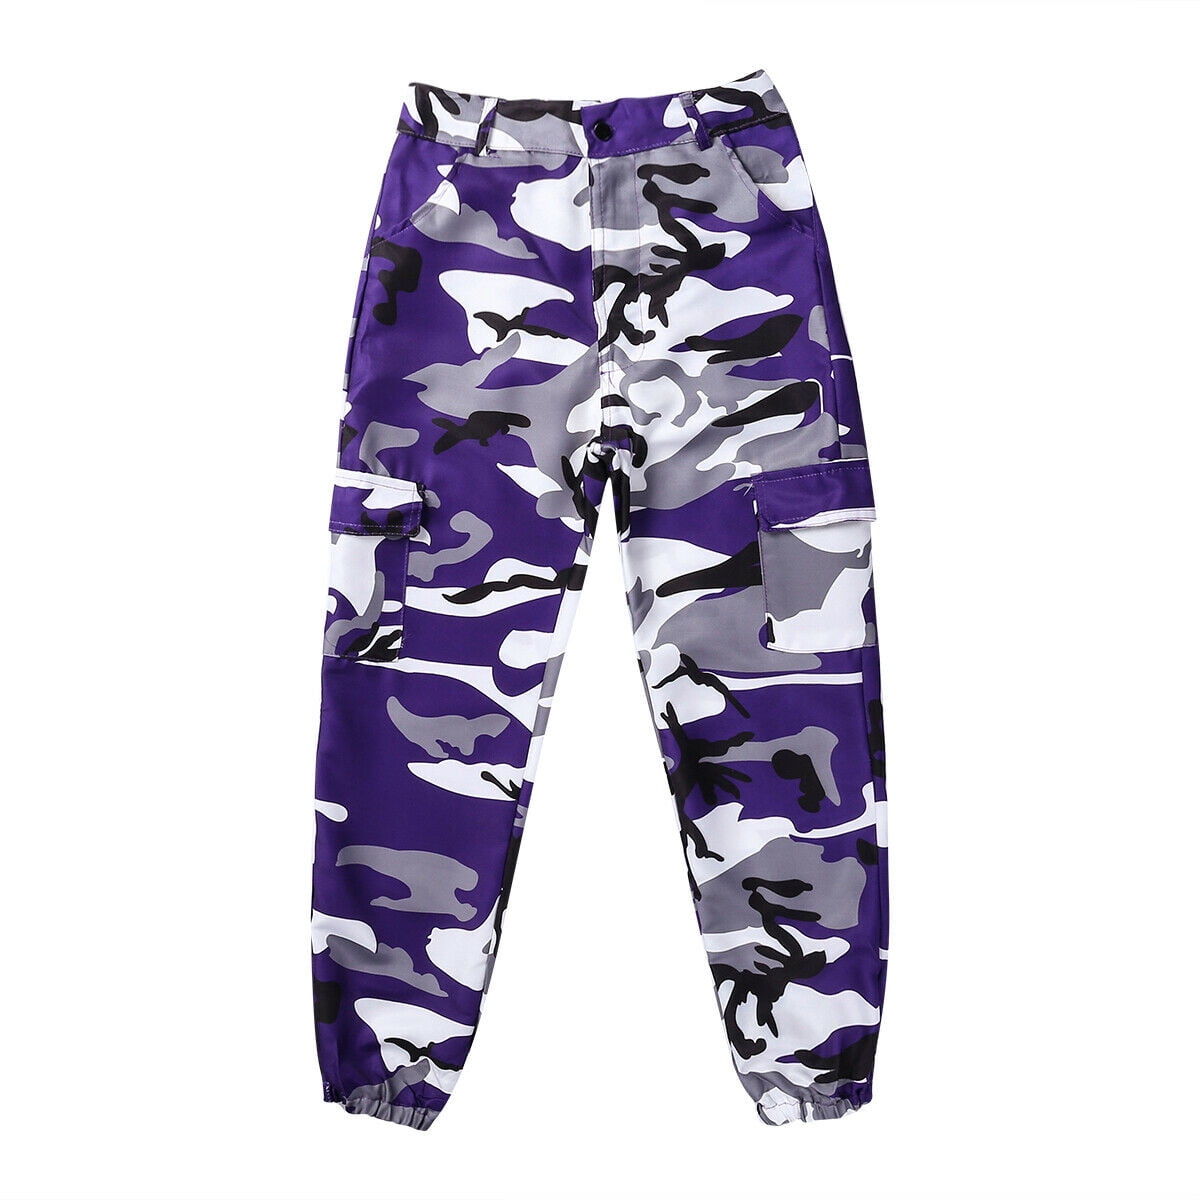 Womens Cargo Casual Pants Military Army Camouflage - Walmart.com